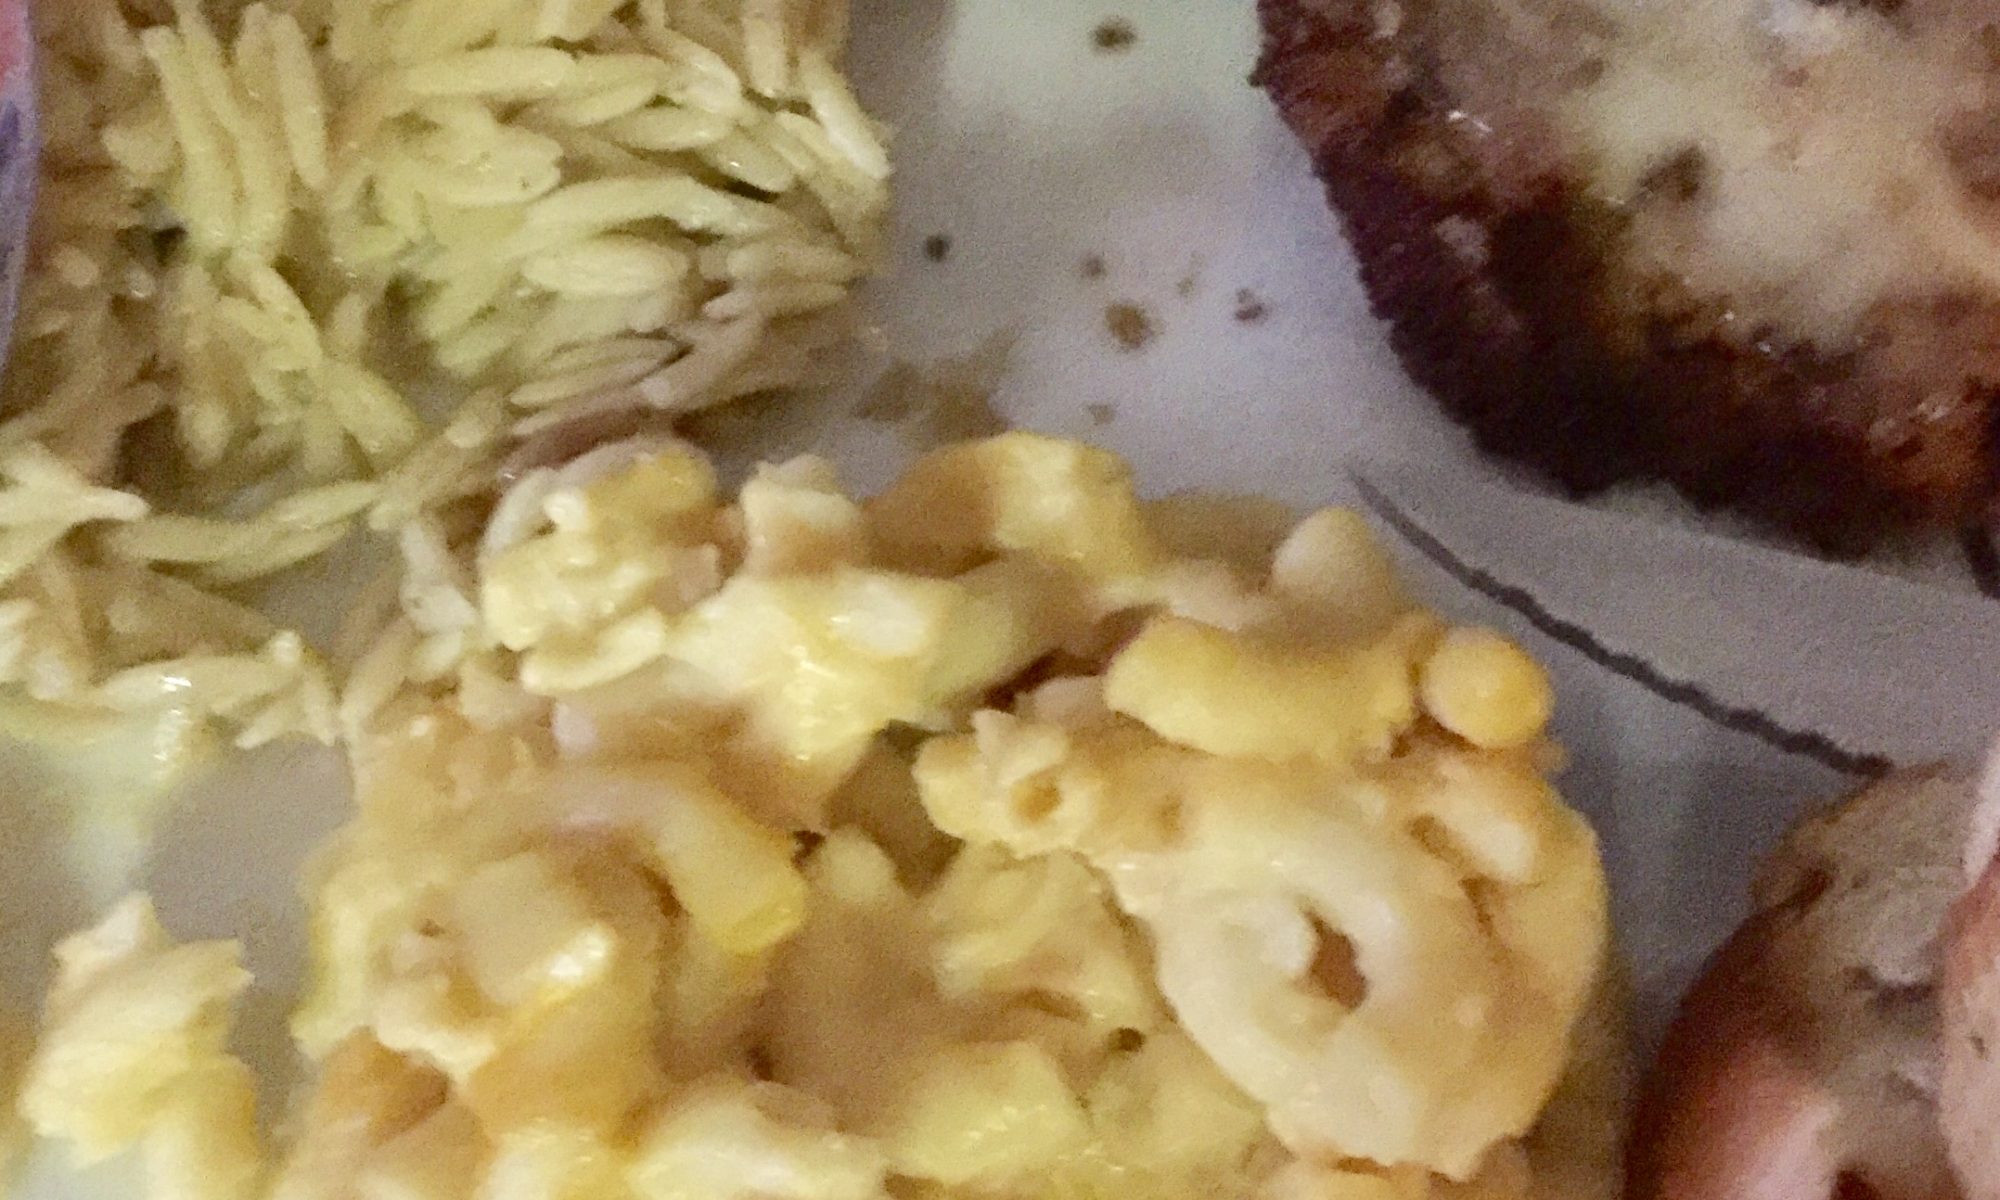 A plate with macaroni and cheese, orso pasta, parmesan chicken, and bread